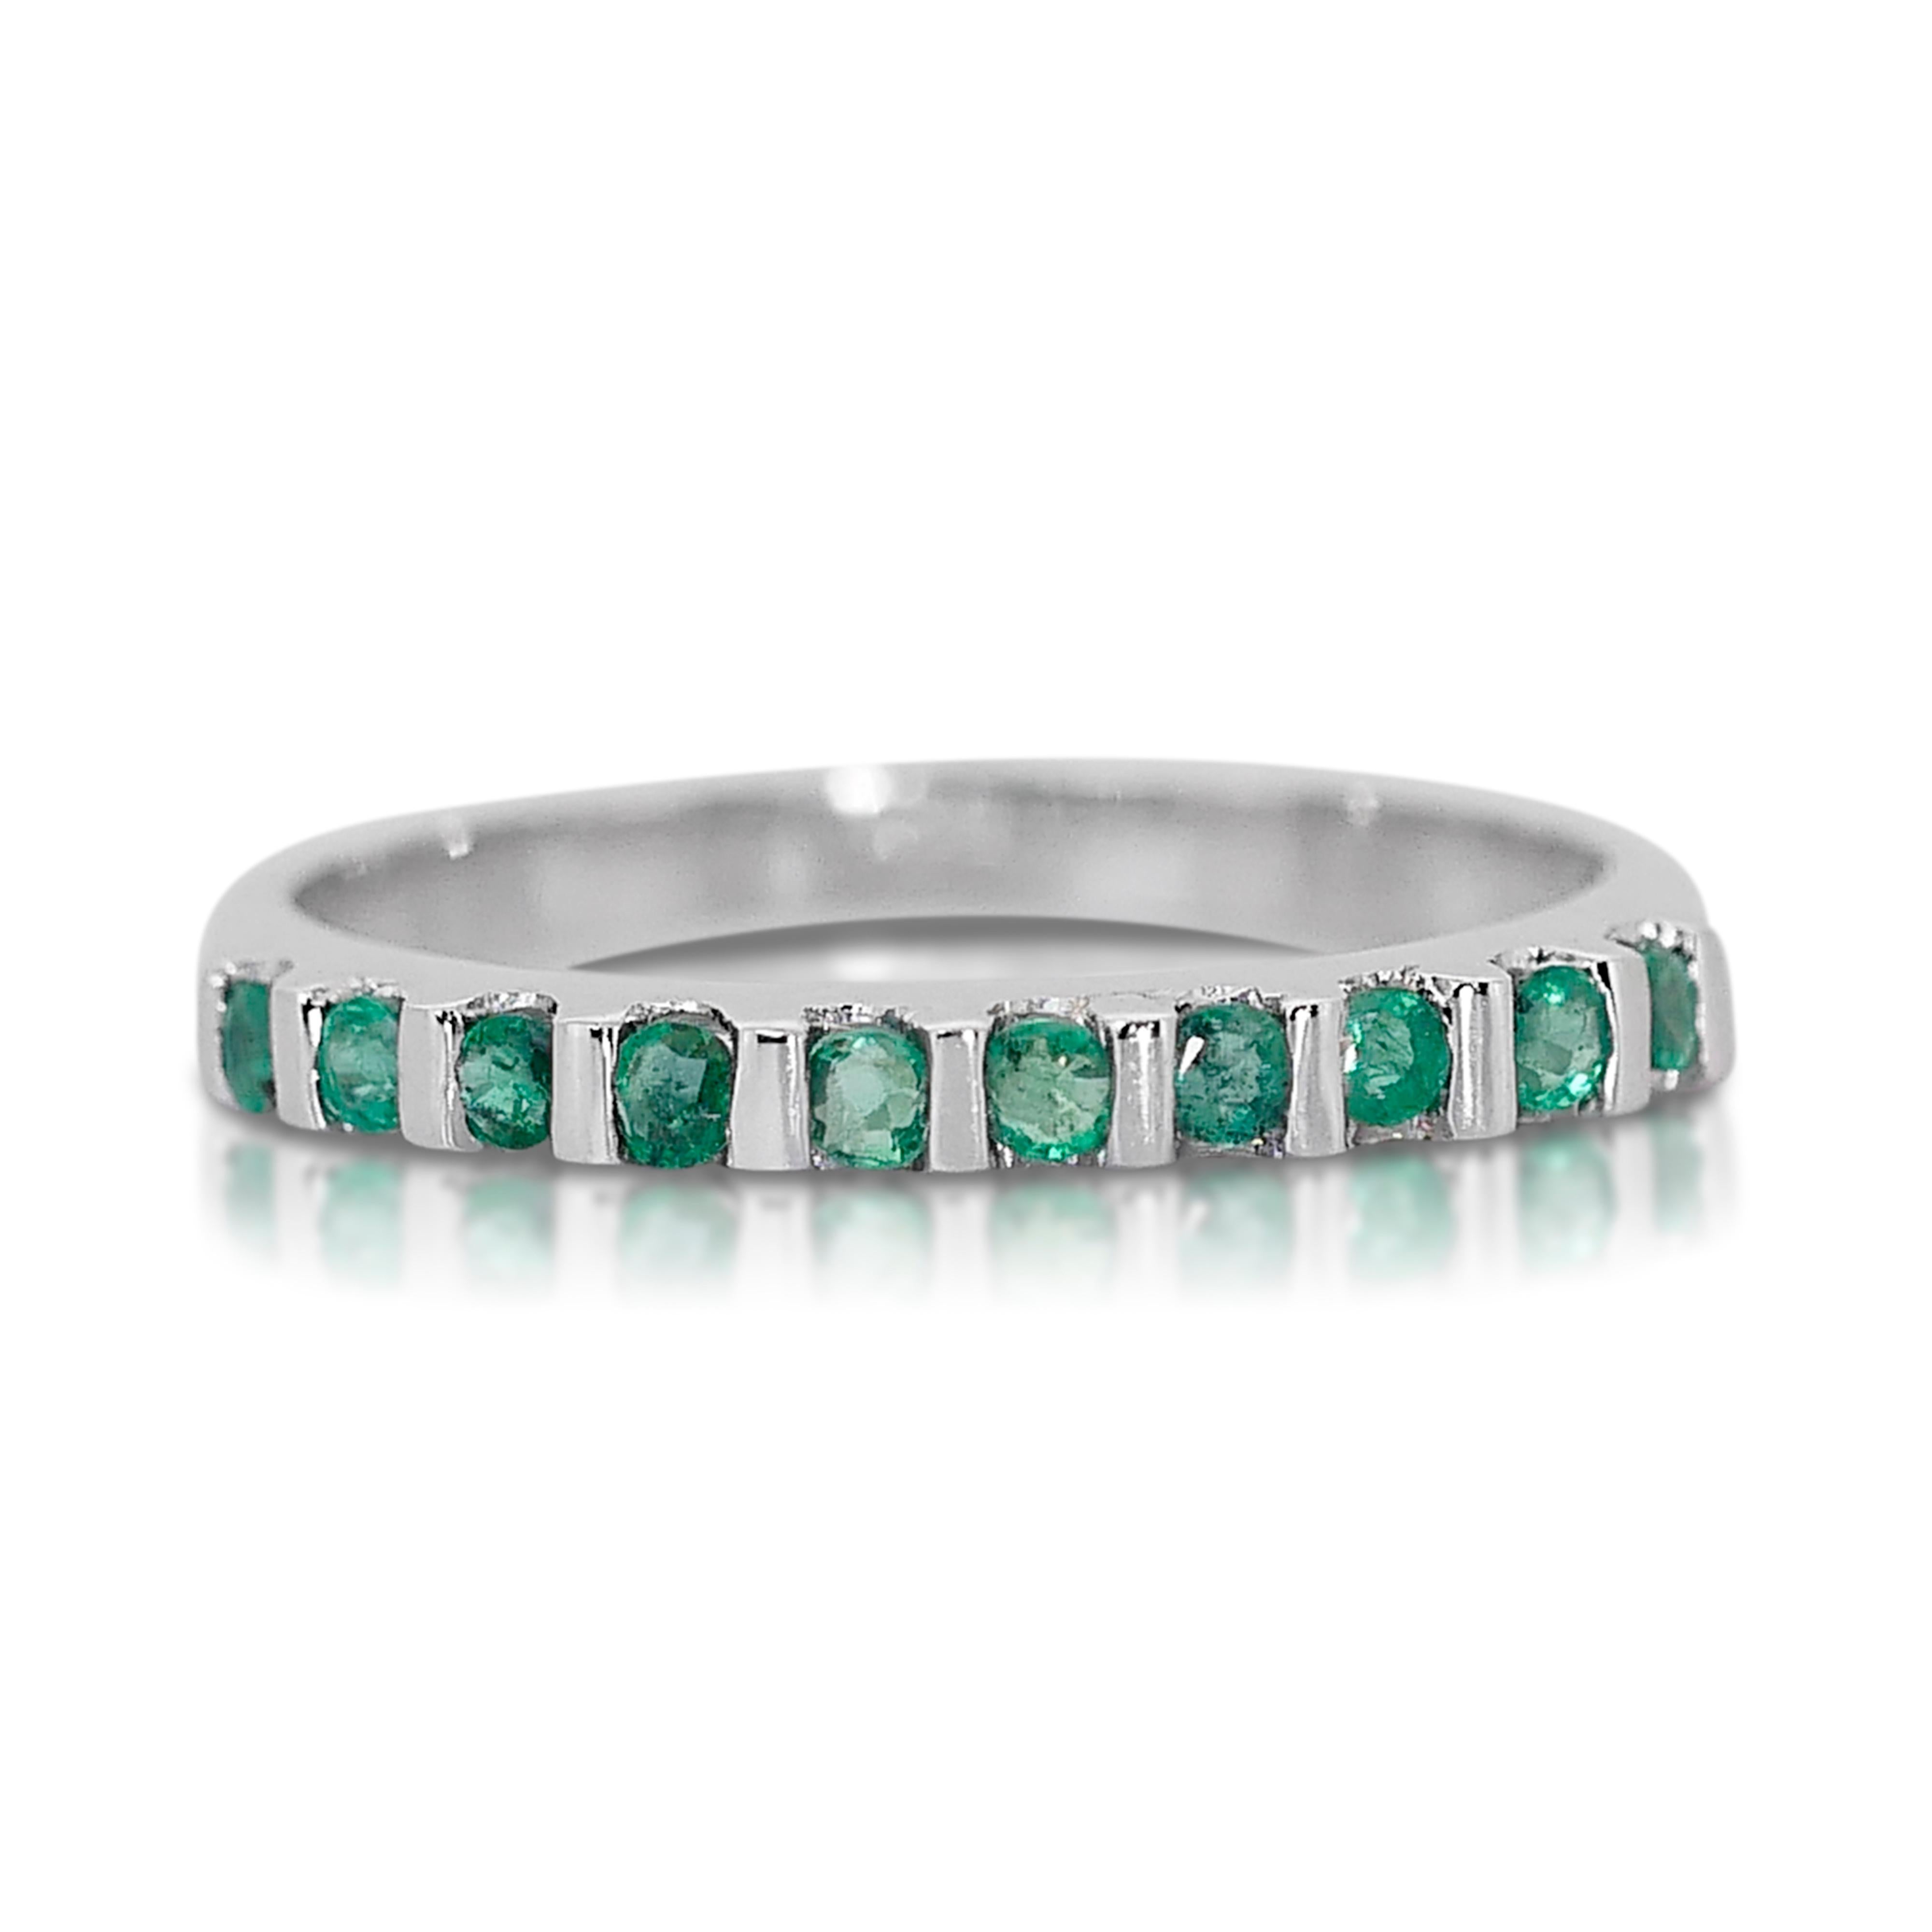 Dazzling 1.22 ct Emerald, Sapphire, Ruby, & Diamond Band Rings in 14k White Gold For Sale 5